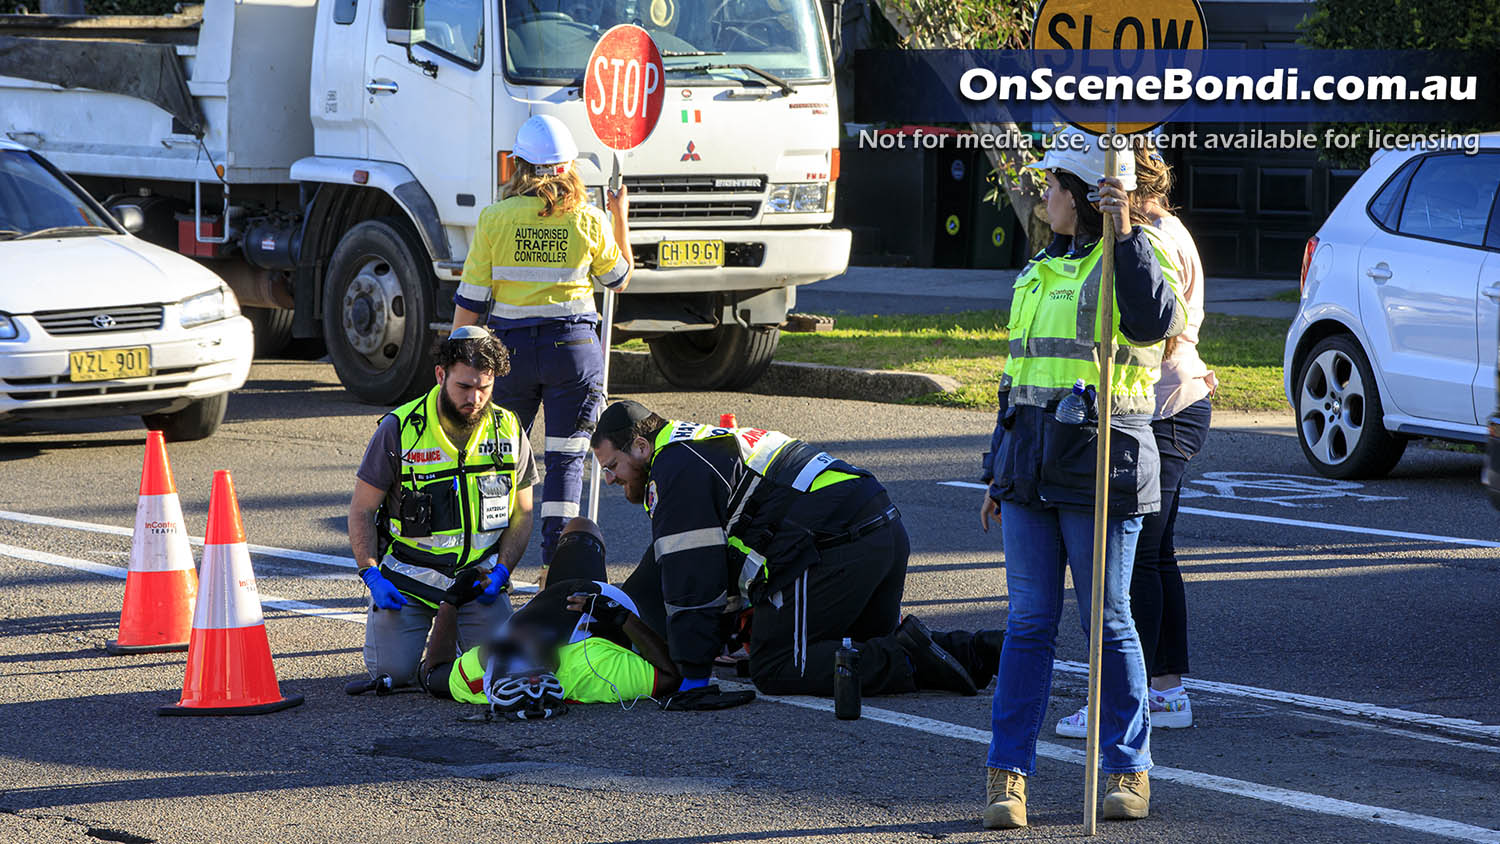 Cyclist hit by truck in Vaucluse